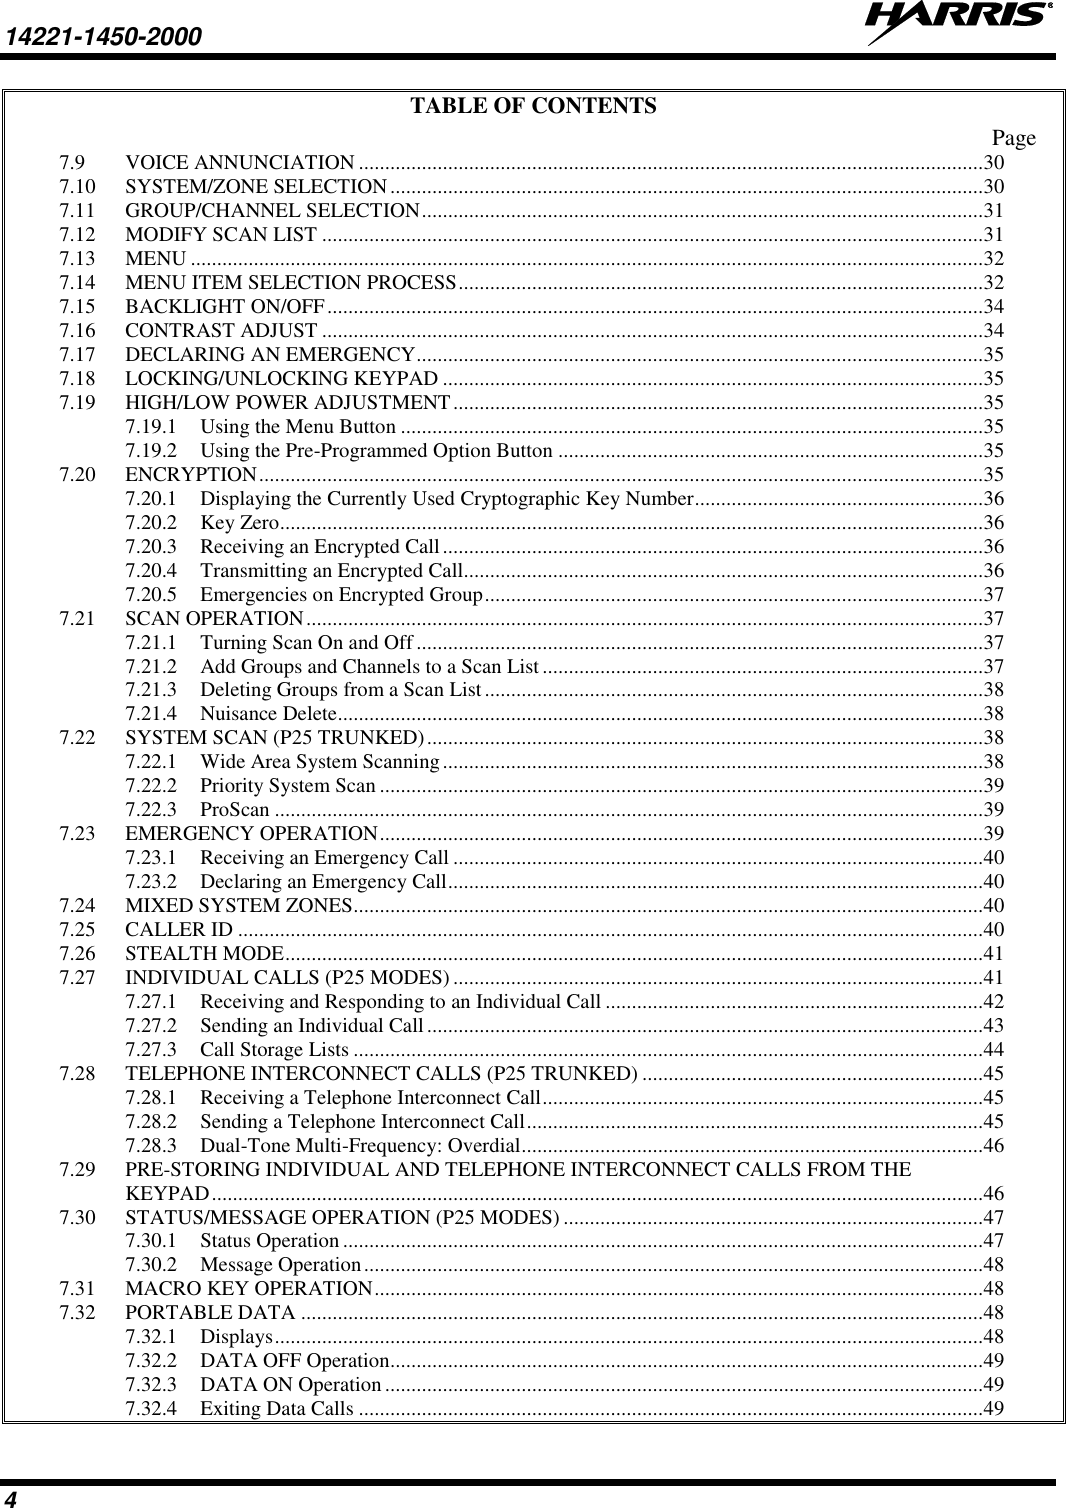 14221-1450-2000   4 TABLE OF CONTENTS Page 7.9 VOICE ANNUNCIATION ....................................................................................................................... 30 7.10 SYSTEM/ZONE SELECTION ................................................................................................................. 30 7.11 GROUP/CHANNEL SELECTION ........................................................................................................... 31 7.12 MODIFY SCAN LIST .............................................................................................................................. 31 7.13 MENU ....................................................................................................................................................... 32 7.14 MENU ITEM SELECTION PROCESS .................................................................................................... 32 7.15 BACKLIGHT ON/OFF ............................................................................................................................. 34 7.16 CONTRAST ADJUST .............................................................................................................................. 34 7.17 DECLARING AN EMERGENCY ............................................................................................................ 35 7.18 LOCKING/UNLOCKING KEYPAD ....................................................................................................... 35 7.19 HIGH/LOW POWER ADJUSTMENT ..................................................................................................... 35 7.19.1 Using the Menu Button ............................................................................................................... 35 7.19.2 Using the Pre-Programmed Option Button ................................................................................. 35 7.20 ENCRYPTION .......................................................................................................................................... 35 7.20.1 Displaying the Currently Used Cryptographic Key Number....................................................... 36 7.20.2 Key Zero ...................................................................................................................................... 36 7.20.3 Receiving an Encrypted Call ....................................................................................................... 36 7.20.4 Transmitting an Encrypted Call................................................................................................... 36 7.20.5 Emergencies on Encrypted Group ............................................................................................... 37 7.21 SCAN OPERATION ................................................................................................................................. 37 7.21.1 Turning Scan On and Off ............................................................................................................ 37 7.21.2 Add Groups and Channels to a Scan List .................................................................................... 37 7.21.3 Deleting Groups from a Scan List ............................................................................................... 38 7.21.4 Nuisance Delete ........................................................................................................................... 38 7.22 SYSTEM SCAN (P25 TRUNKED) .......................................................................................................... 38 7.22.1 Wide Area System Scanning ....................................................................................................... 38 7.22.2 Priority System Scan ................................................................................................................... 39 7.22.3 ProScan ....................................................................................................................................... 39 7.23 EMERGENCY OPERATION ................................................................................................................... 39 7.23.1 Receiving an Emergency Call ..................................................................................................... 40 7.23.2 Declaring an Emergency Call ...................................................................................................... 40 7.24 MIXED SYSTEM ZONES........................................................................................................................ 40 7.25 CALLER ID .............................................................................................................................................. 40 7.26 STEALTH MODE ..................................................................................................................................... 41 7.27 INDIVIDUAL CALLS (P25 MODES) ..................................................................................................... 41 7.27.1 Receiving and Responding to an Individual Call ........................................................................ 42 7.27.2 Sending an Individual Call .......................................................................................................... 43 7.27.3 Call Storage Lists ........................................................................................................................ 44 7.28 TELEPHONE INTERCONNECT CALLS (P25 TRUNKED) ................................................................. 45 7.28.1 Receiving a Telephone Interconnect Call .................................................................................... 45 7.28.2 Sending a Telephone Interconnect Call ....................................................................................... 45 7.28.3 Dual-Tone Multi-Frequency: Overdial ........................................................................................ 46 7.29 PRE-STORING INDIVIDUAL AND TELEPHONE INTERCONNECT CALLS FROM THE KEYPAD ................................................................................................................................................... 46 7.30 STATUS/MESSAGE OPERATION (P25 MODES) ................................................................................ 47 7.30.1 Status Operation .......................................................................................................................... 47 7.30.2 Message Operation ...................................................................................................................... 48 7.31 MACRO KEY OPERATION .................................................................................................................... 48 7.32 PORTABLE DATA .................................................................................................................................. 48 7.32.1 Displays ....................................................................................................................................... 48 7.32.2 DATA OFF Operation................................................................................................................. 49 7.32.3 DATA ON Operation .................................................................................................................. 49 7.32.4 Exiting Data Calls ....................................................................................................................... 49 